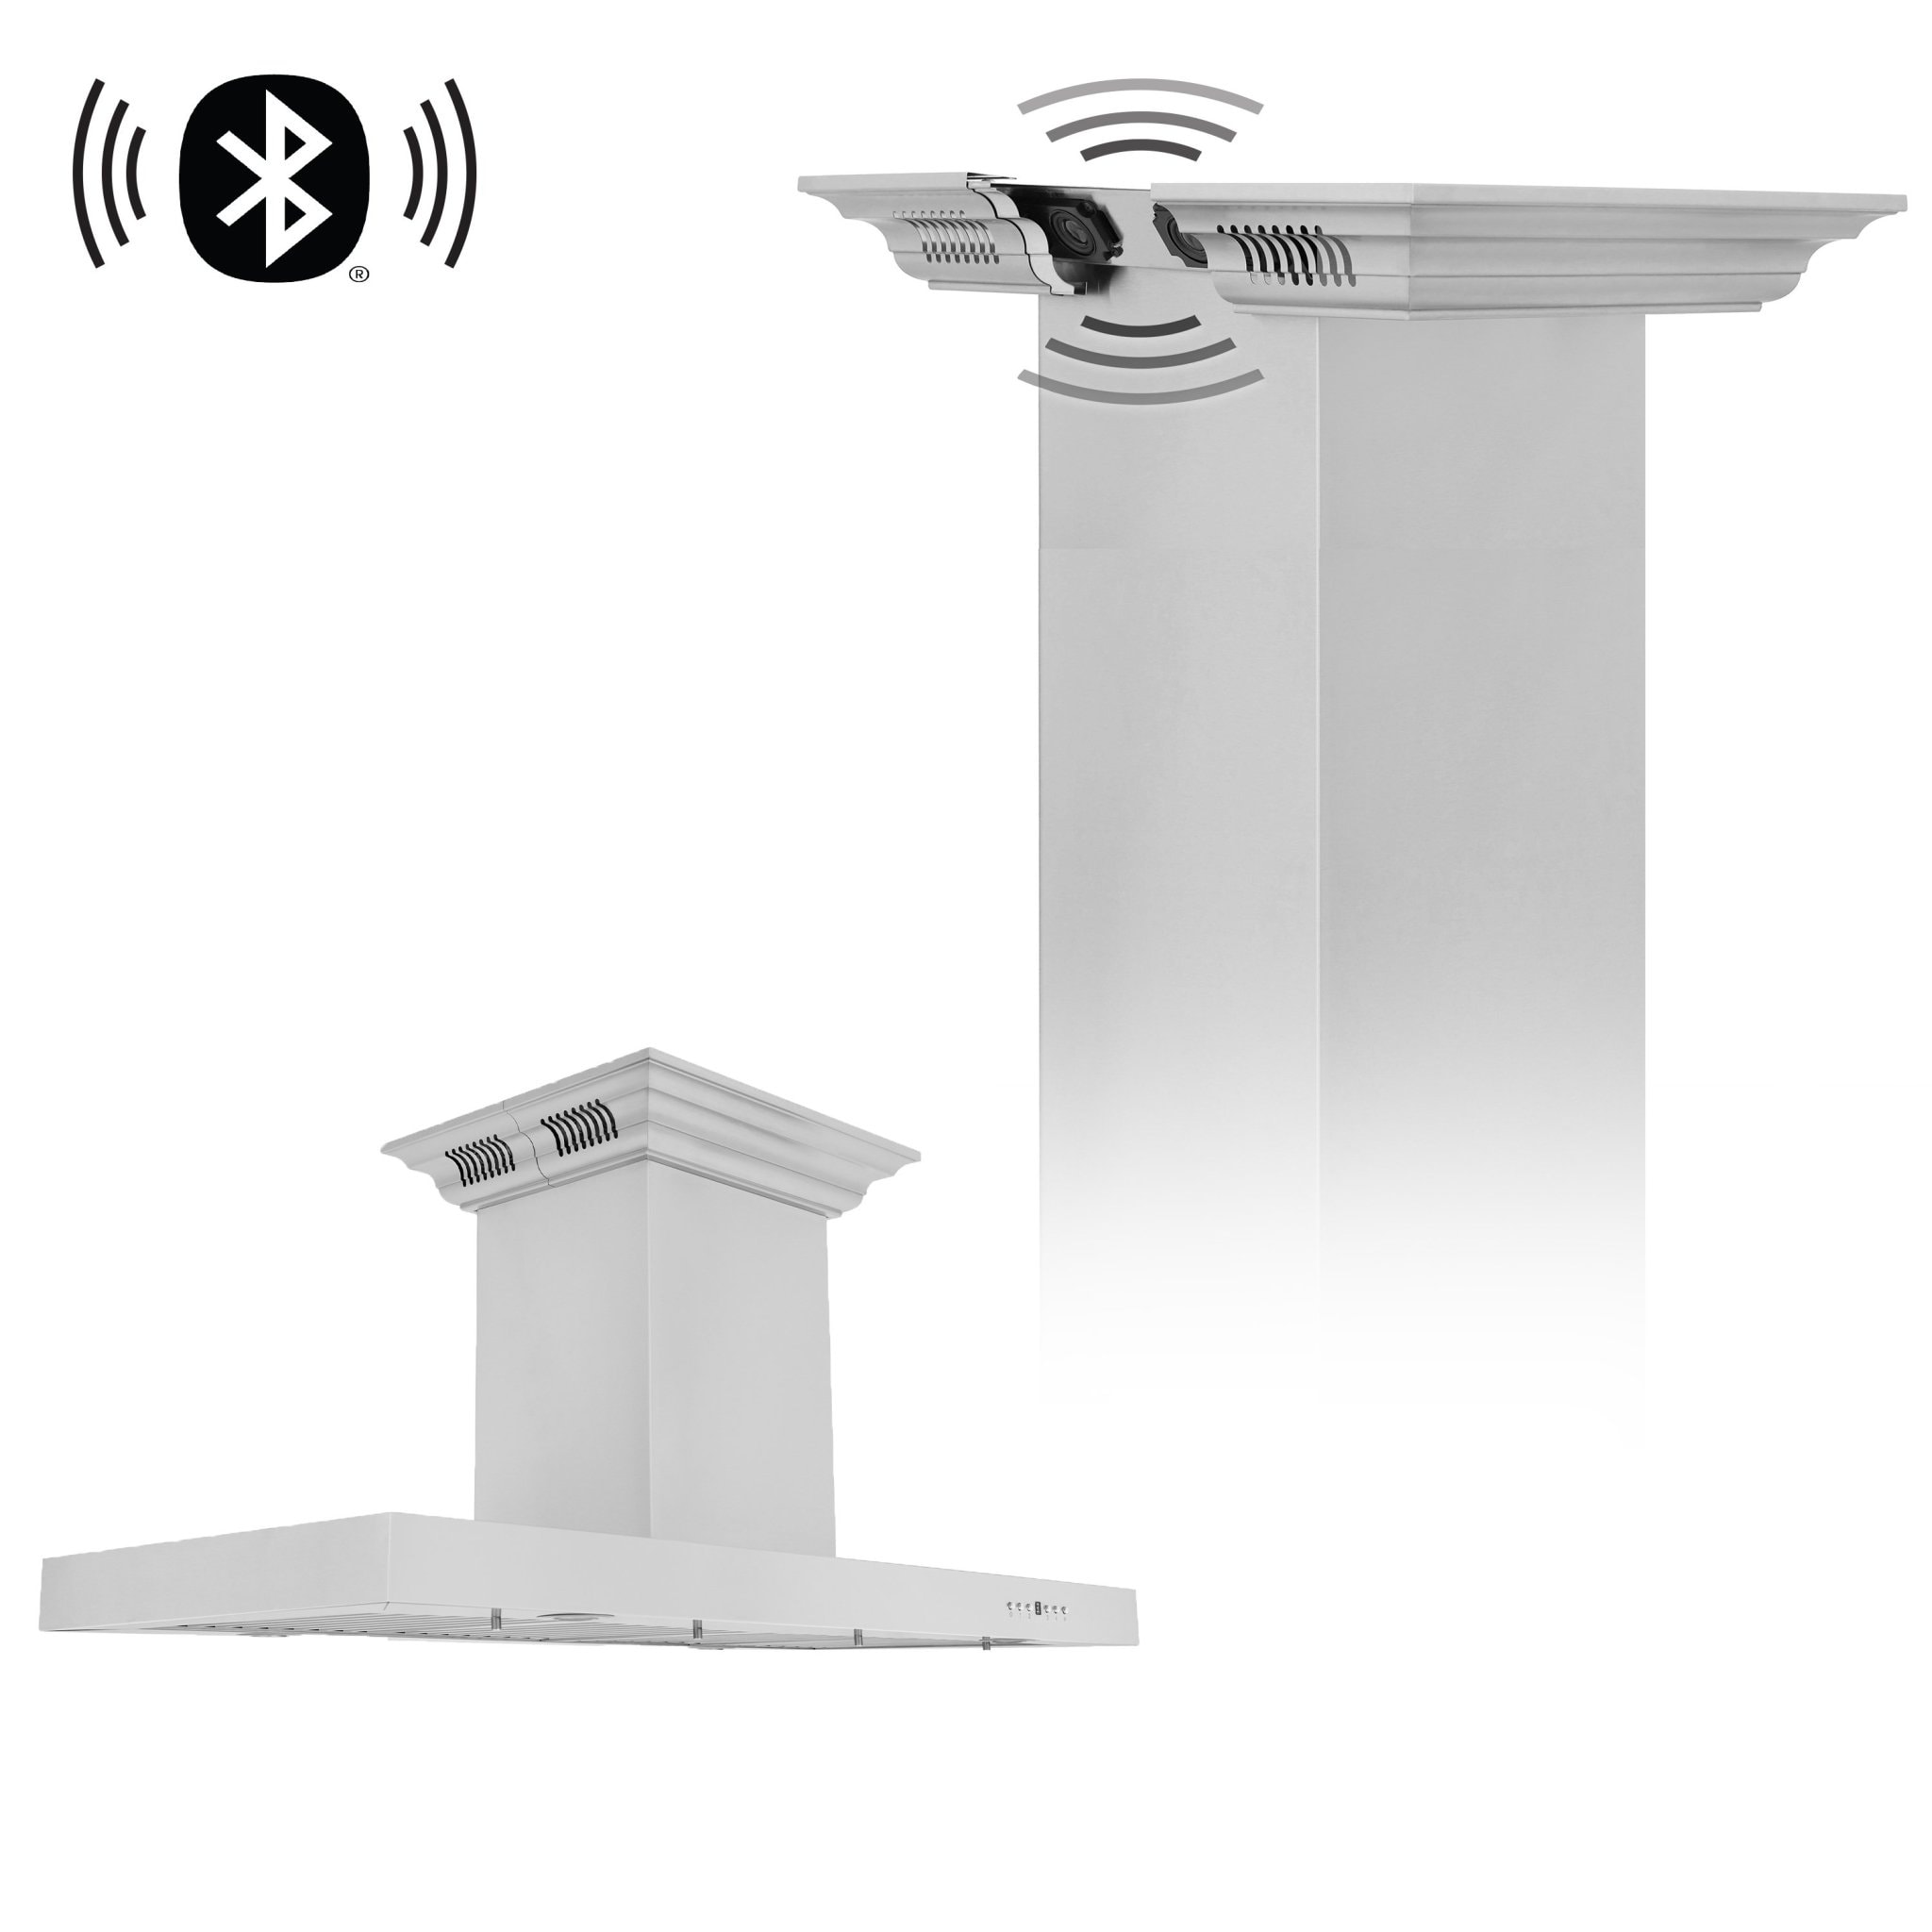 ZLINE Convertible Wall Mount Range Hood in Black Stainless Steel with Set of 2 Charcoal Filters